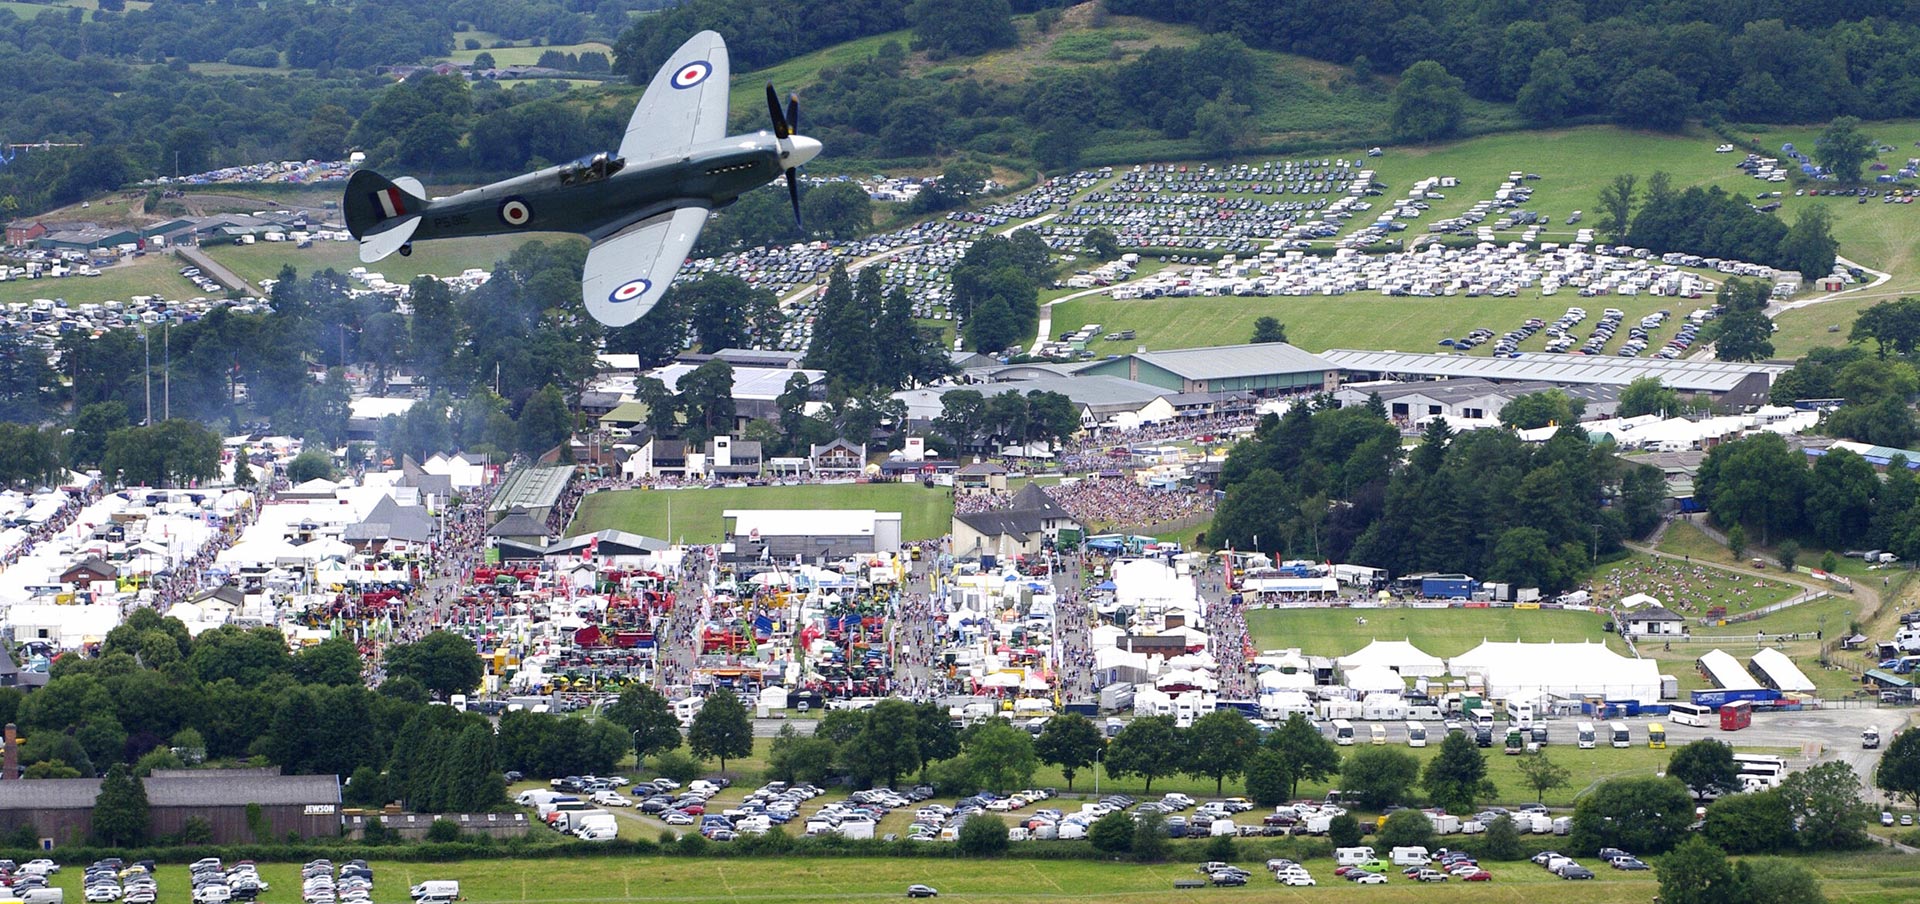 Ariel shot of the Royal Welsh Show Ground